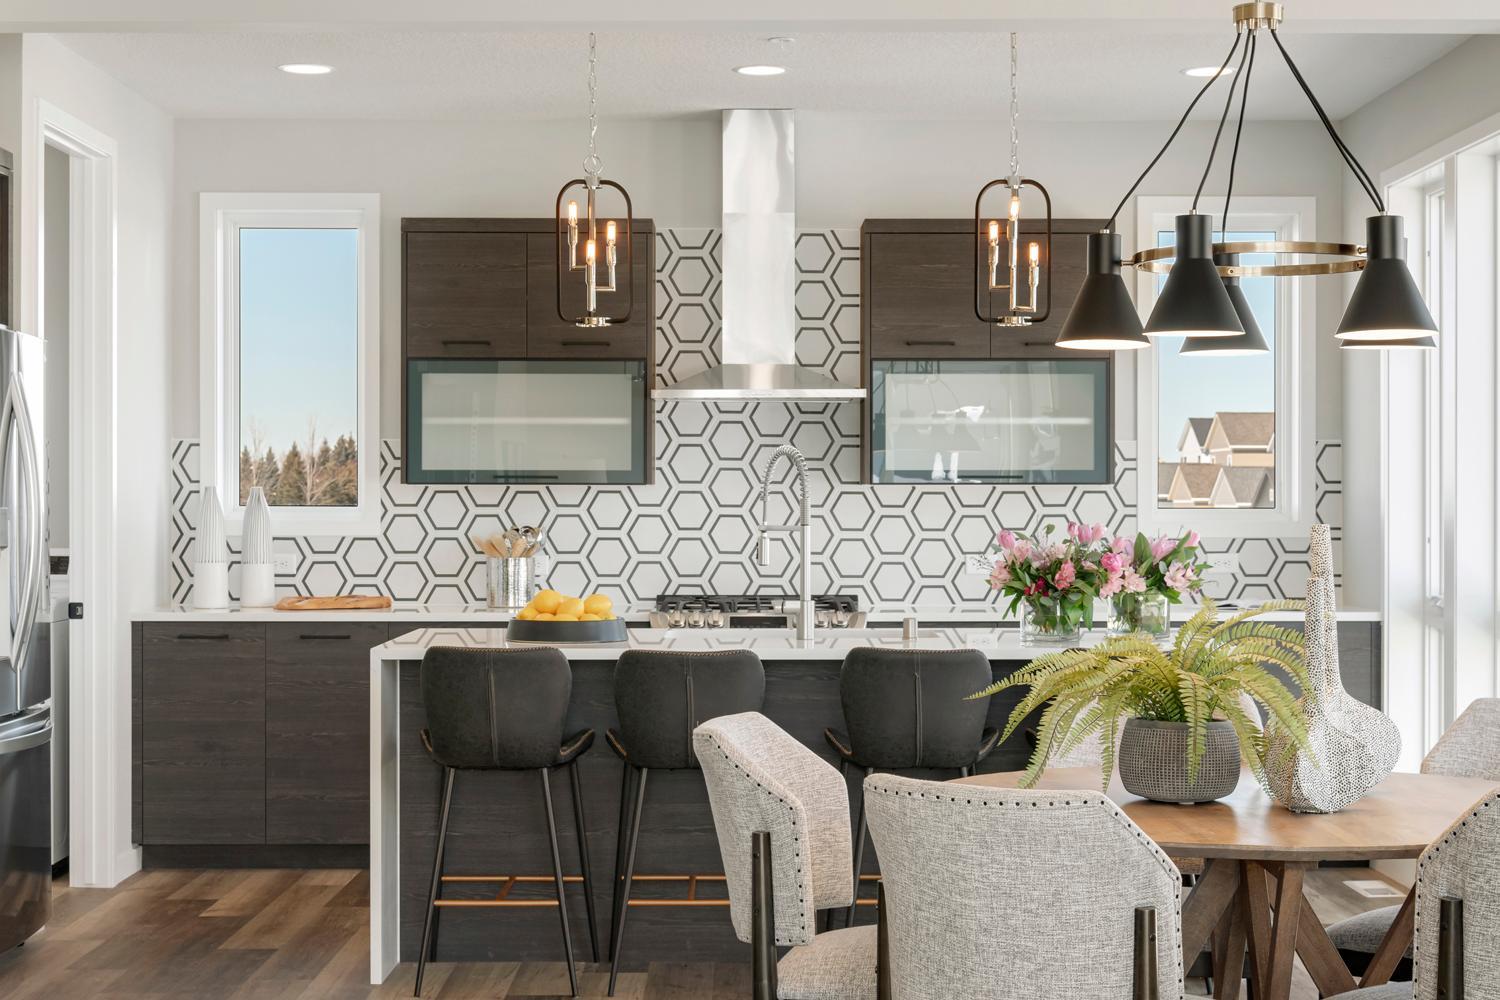 Urban inspired interiors with gourmet kitchens and luxury features. Photo is of model home; options and features will vary.